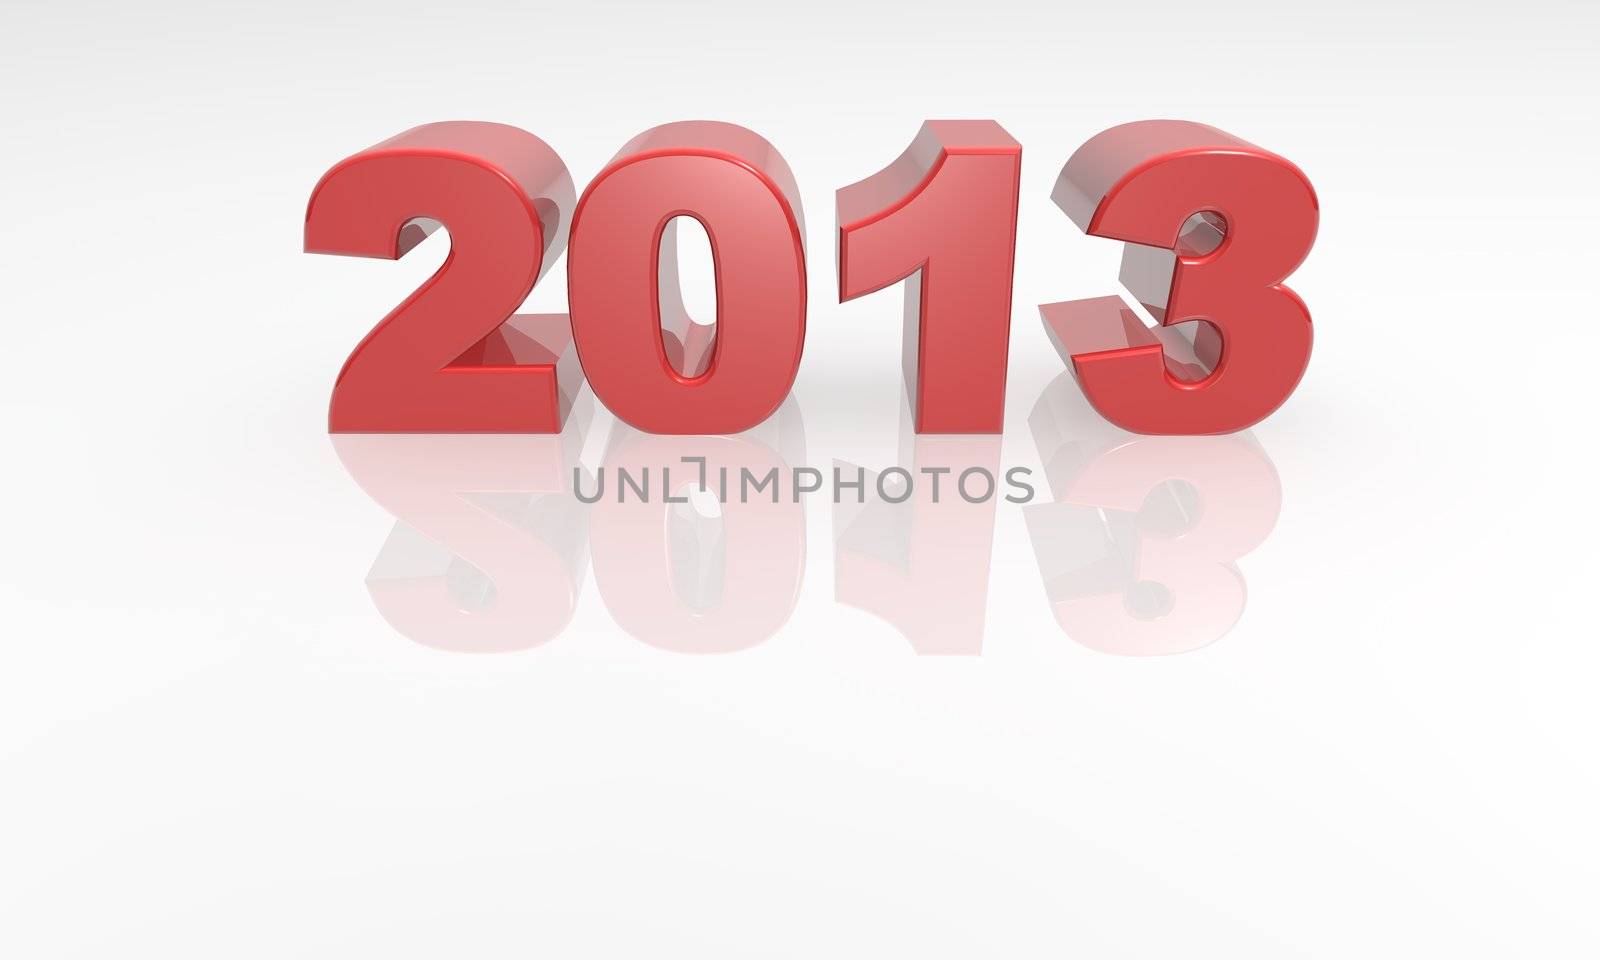 2013 new year 3d red text font by jeremywhat